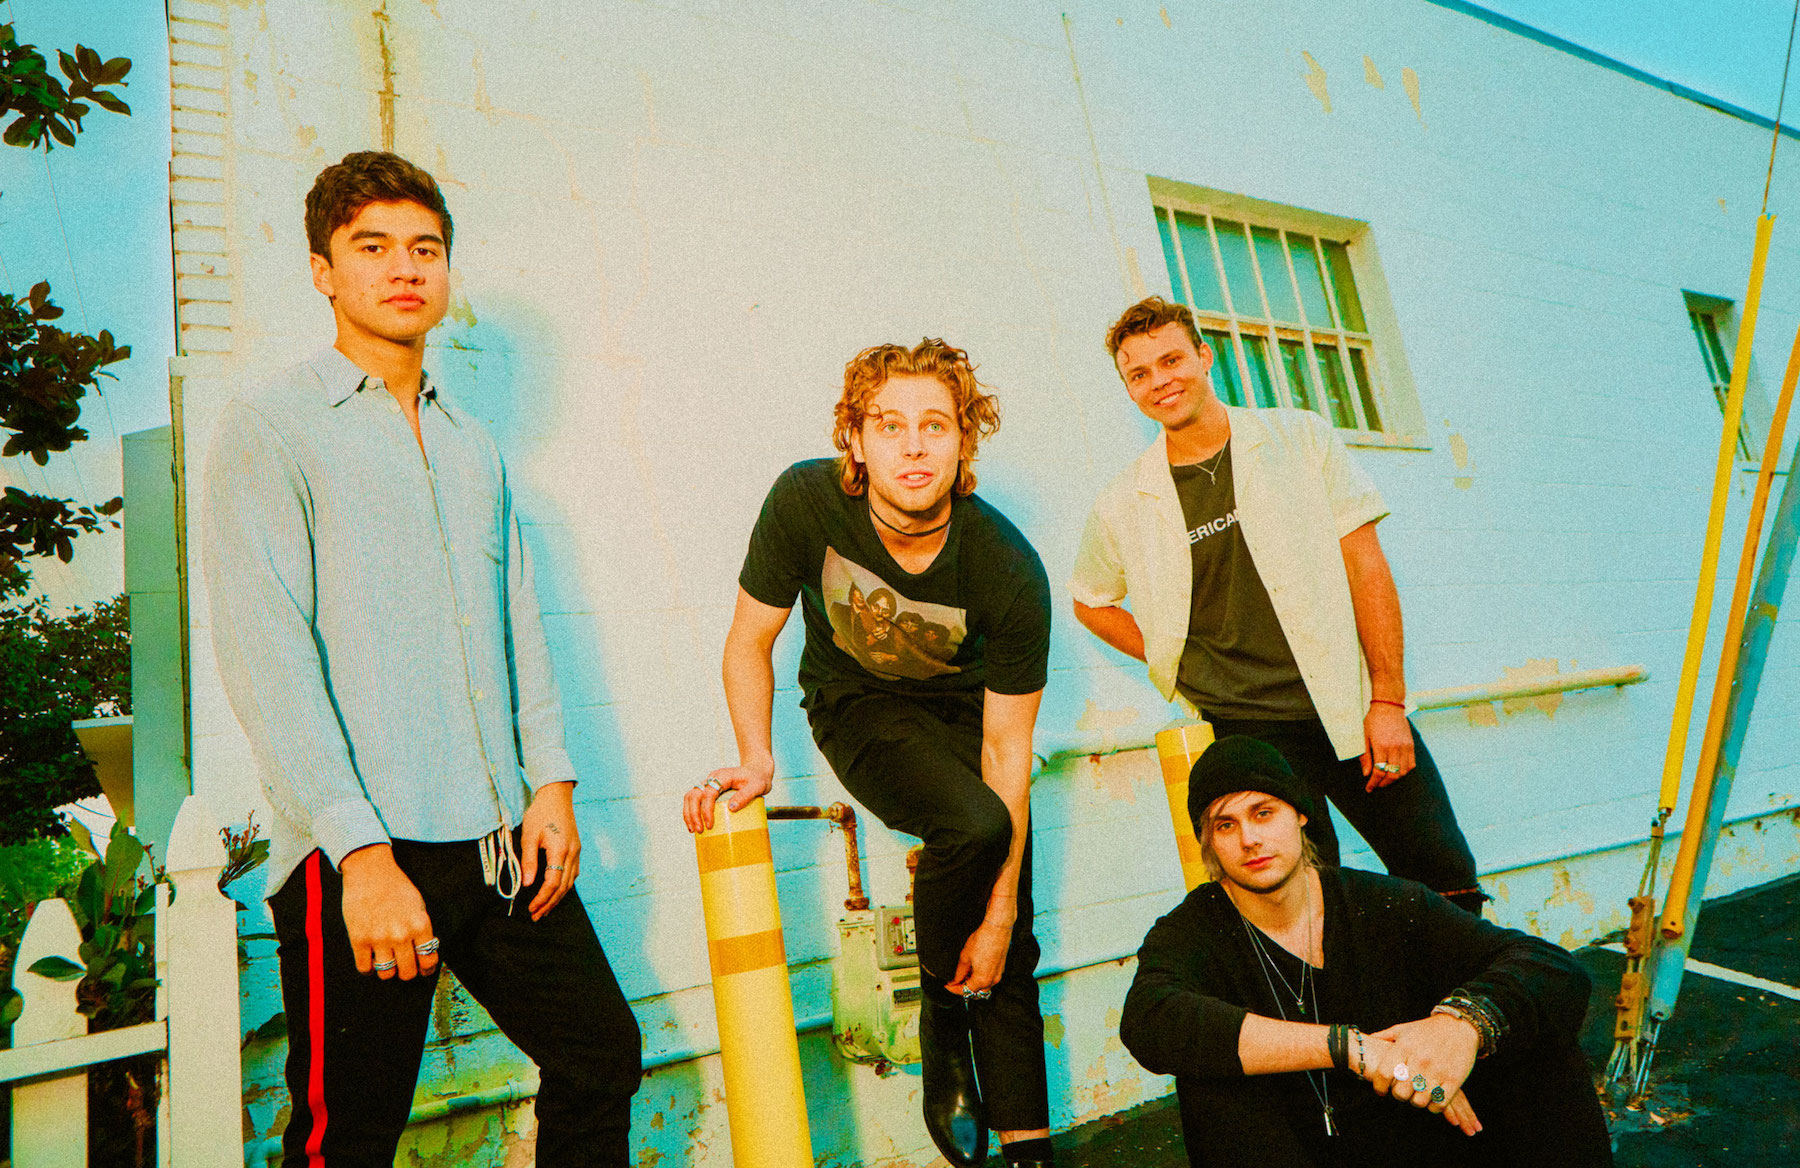 “Youngblood reaching the #1 position on the Hot 100 was a welcome and hard fought-for surprise”: EMI revels in 5SOS’ radio glory